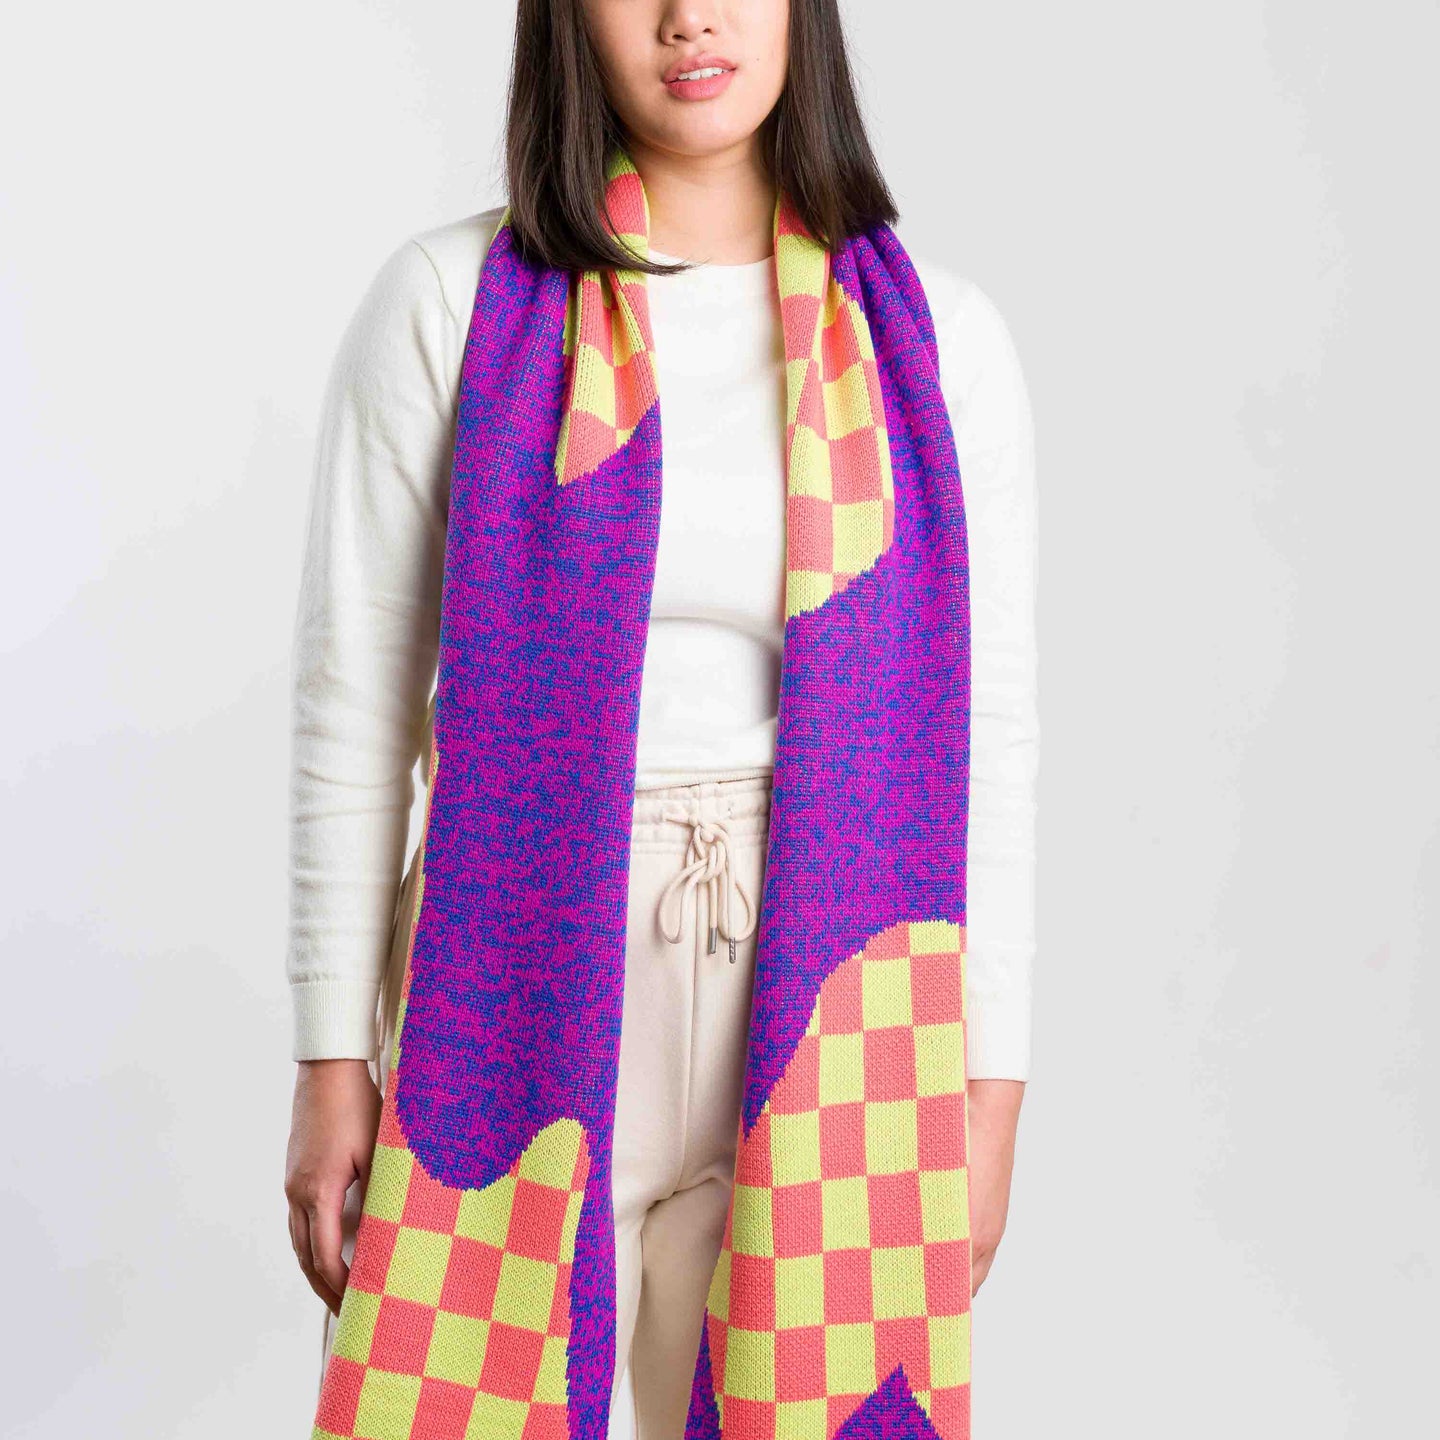 Checkerboard Spill Big Knit Scarf Winter Graphic Bright Colorful On Model Wearing